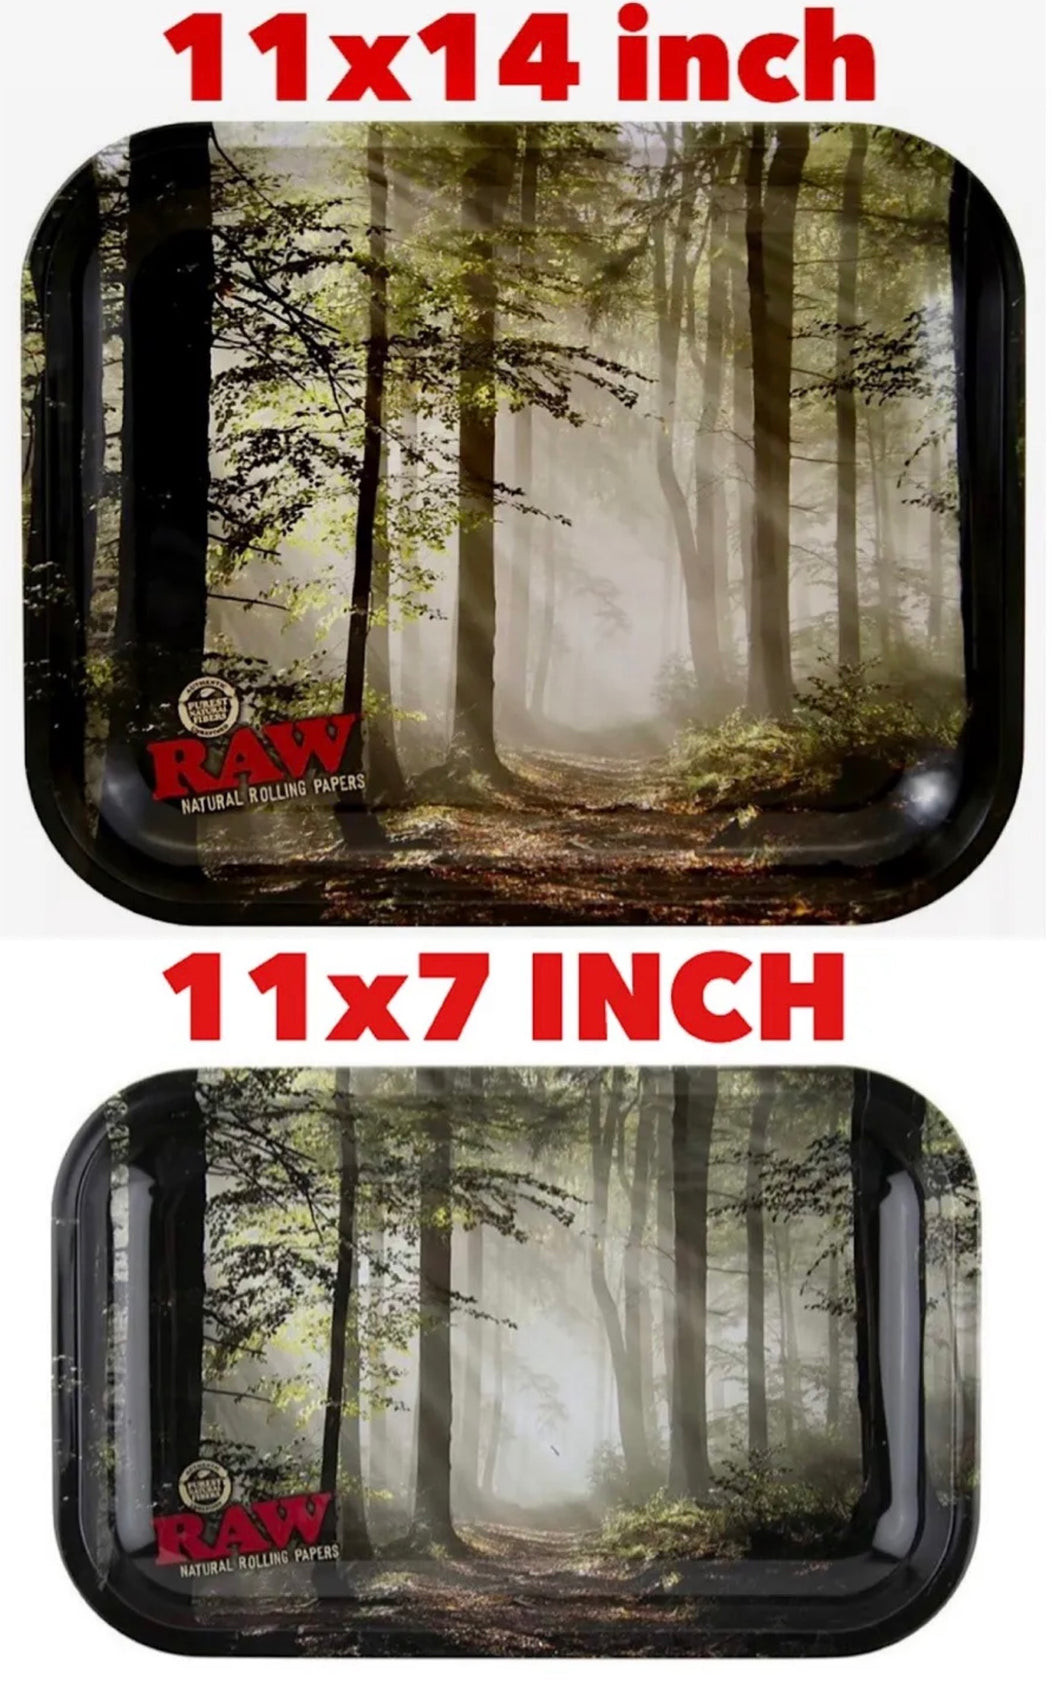 RAW FOREST metal rolling tray(14x11)(11x7)LARGE&SMALL (2 packs) with certific